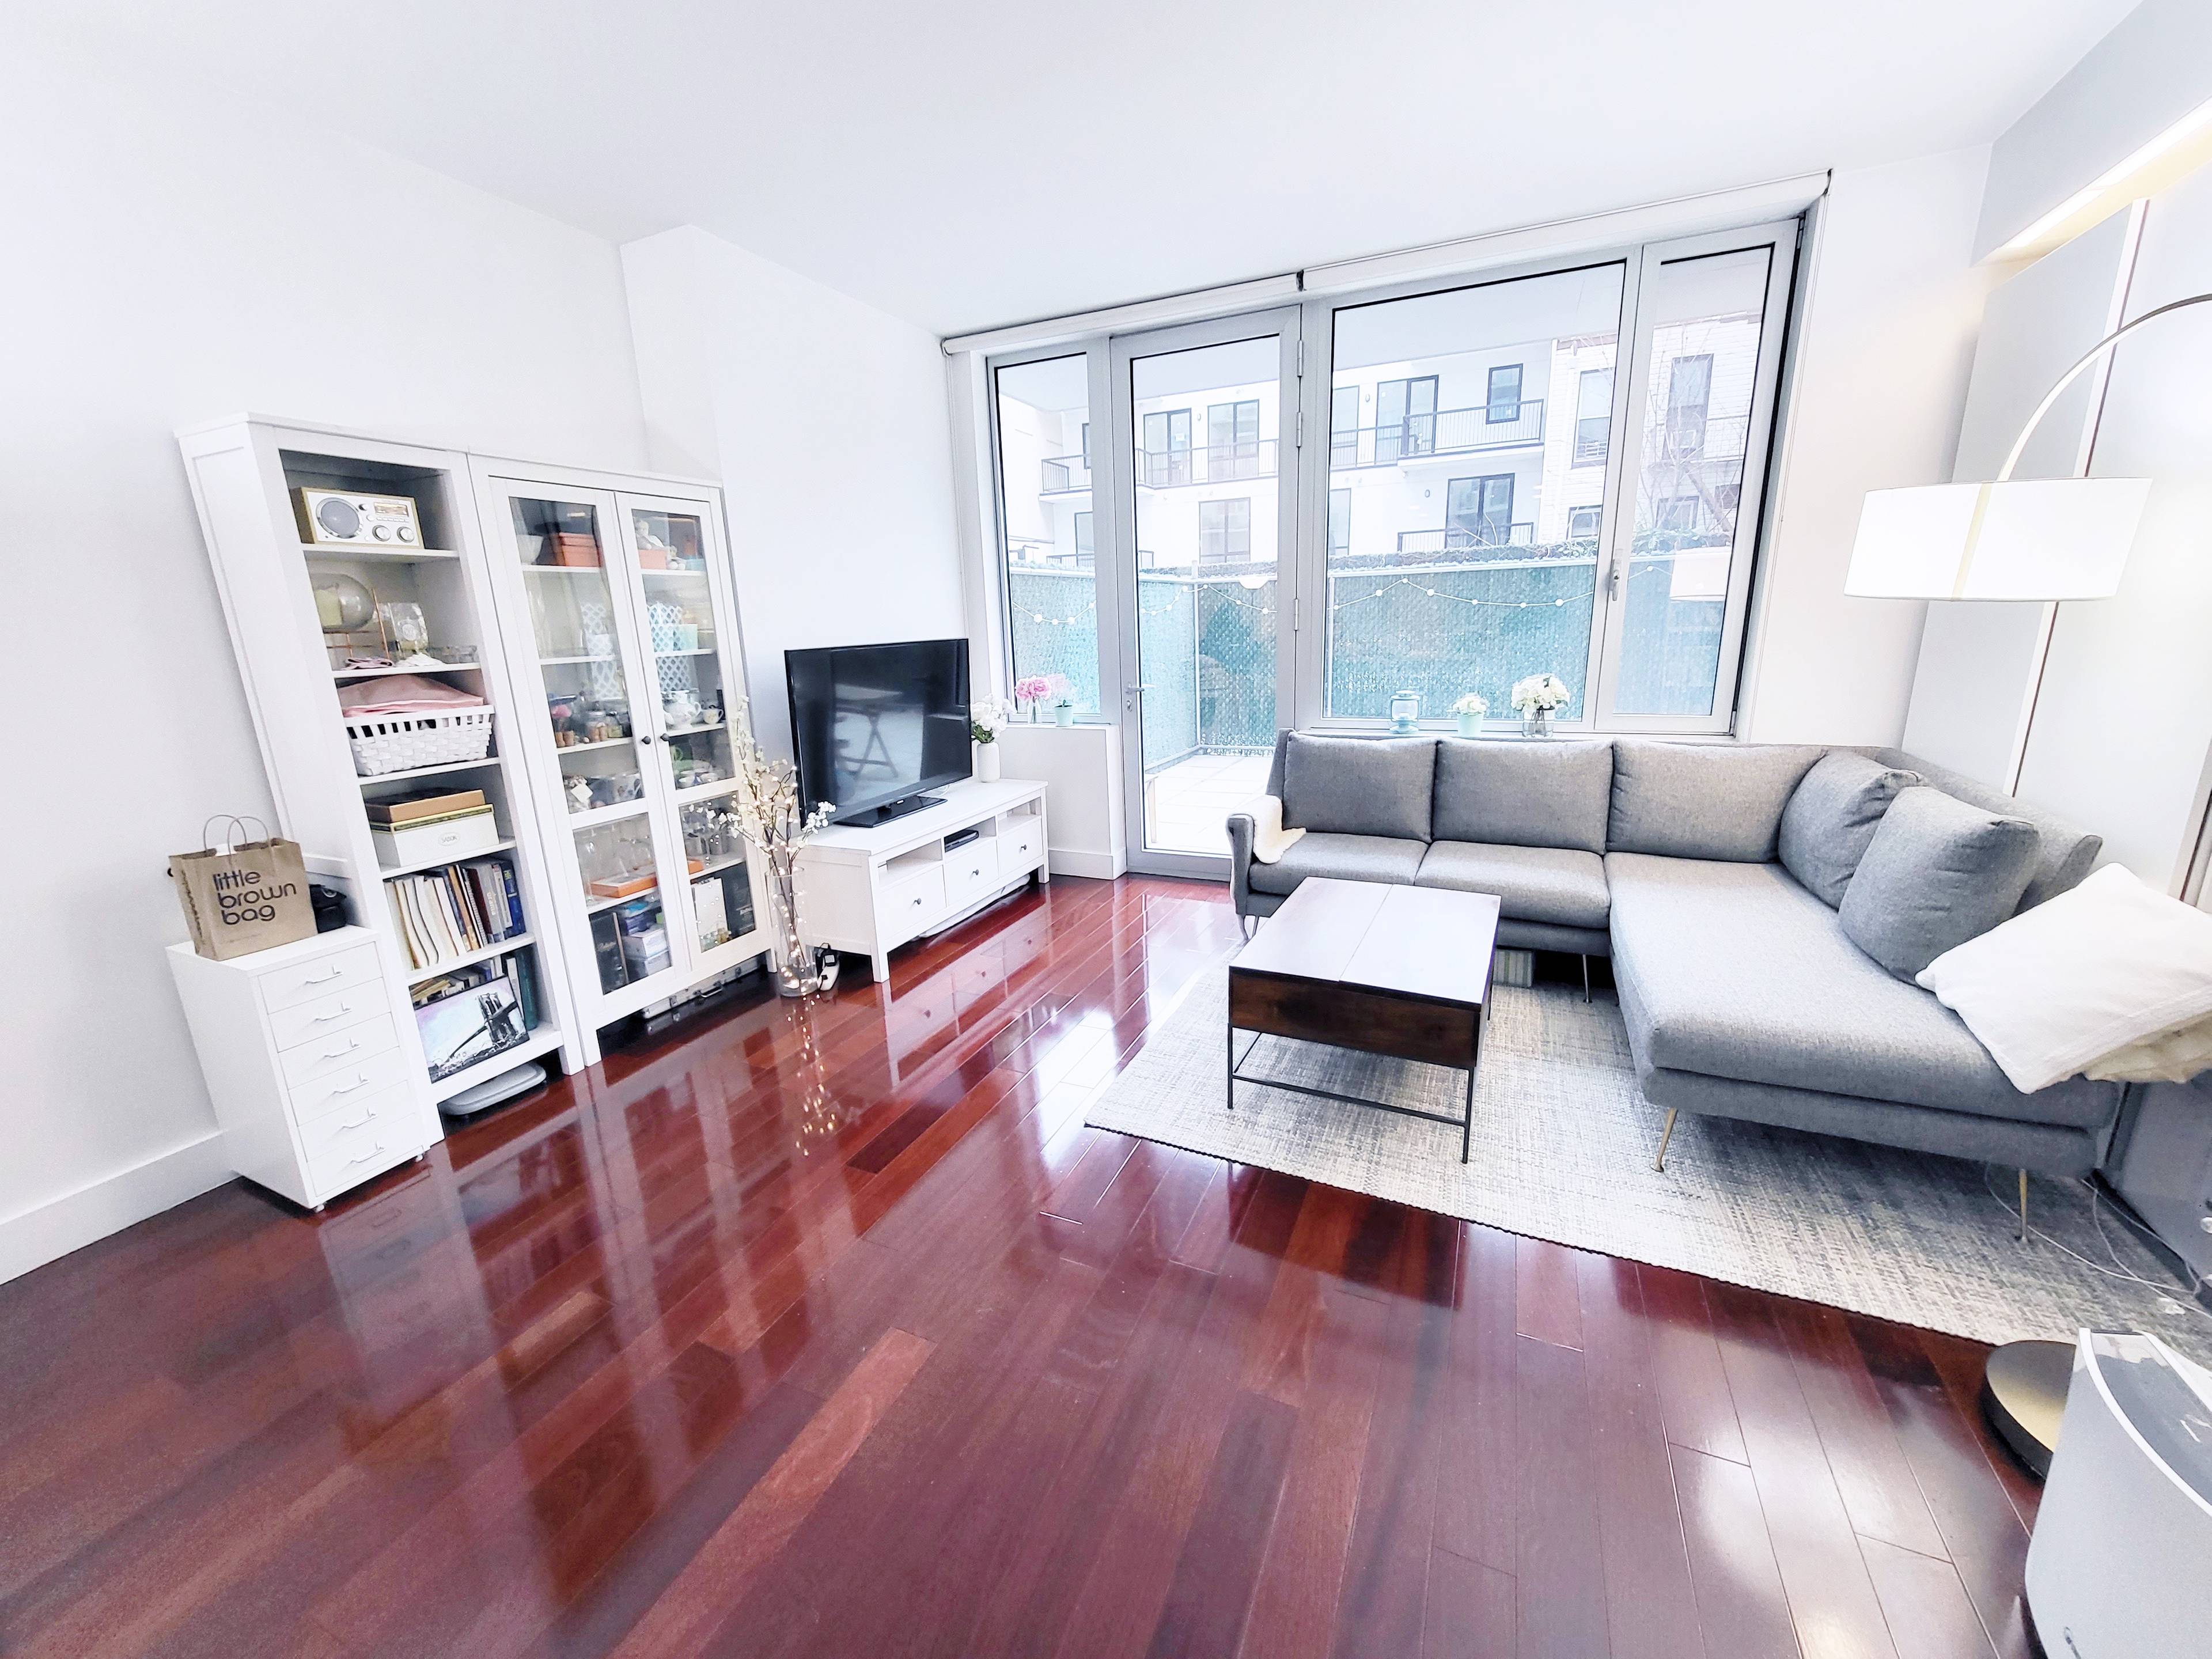 Full Service Luxury 1 Bed/1 Bath + 400 SQFT Private Terrace in Hunters Point LIC!